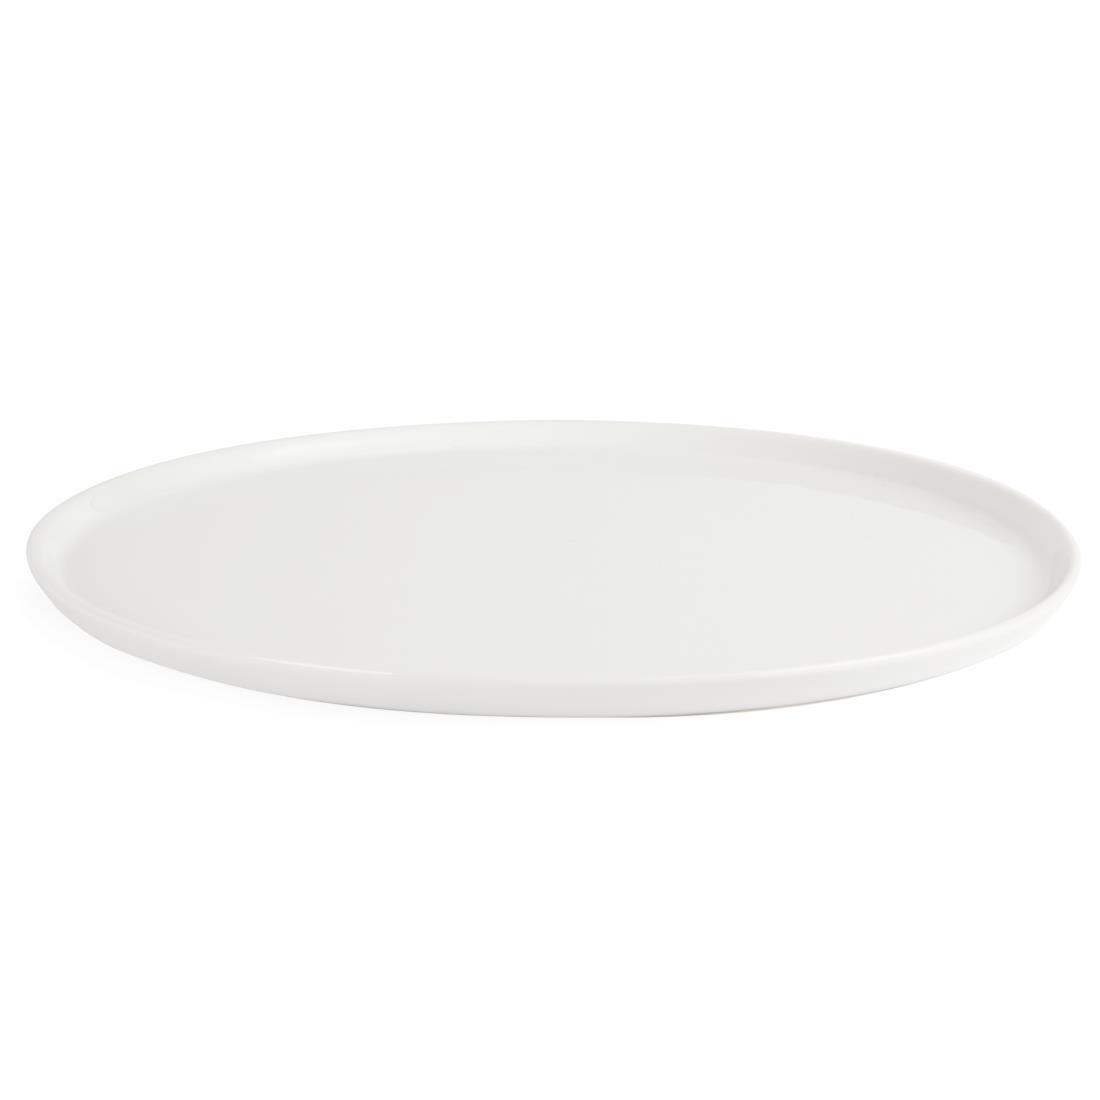 Olympia Whiteware Pizza Plates 330mm (Pack of 4) - CD723  - 2